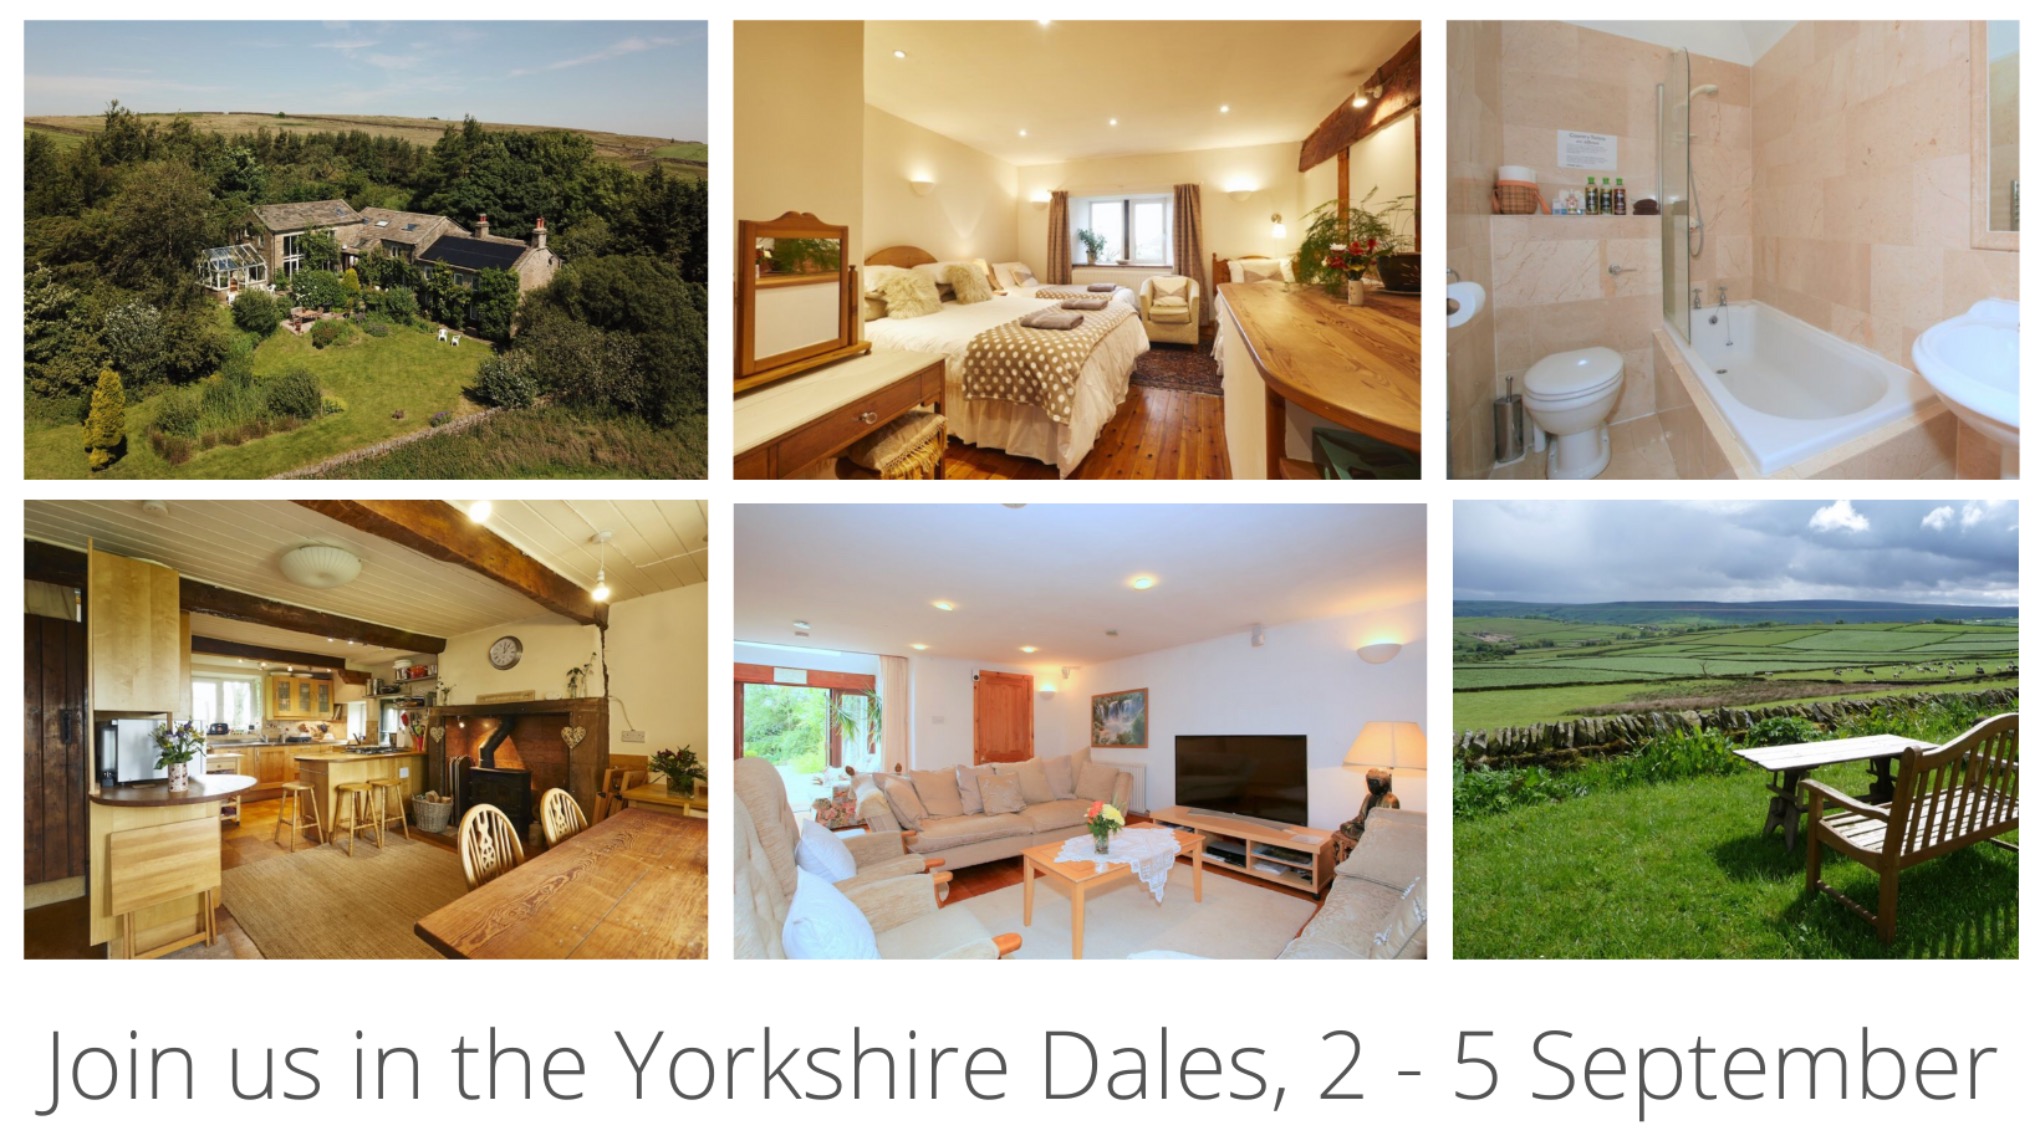 'Escape To The Dales' Yoga and Wellness Retreat, Yorkshire Dales